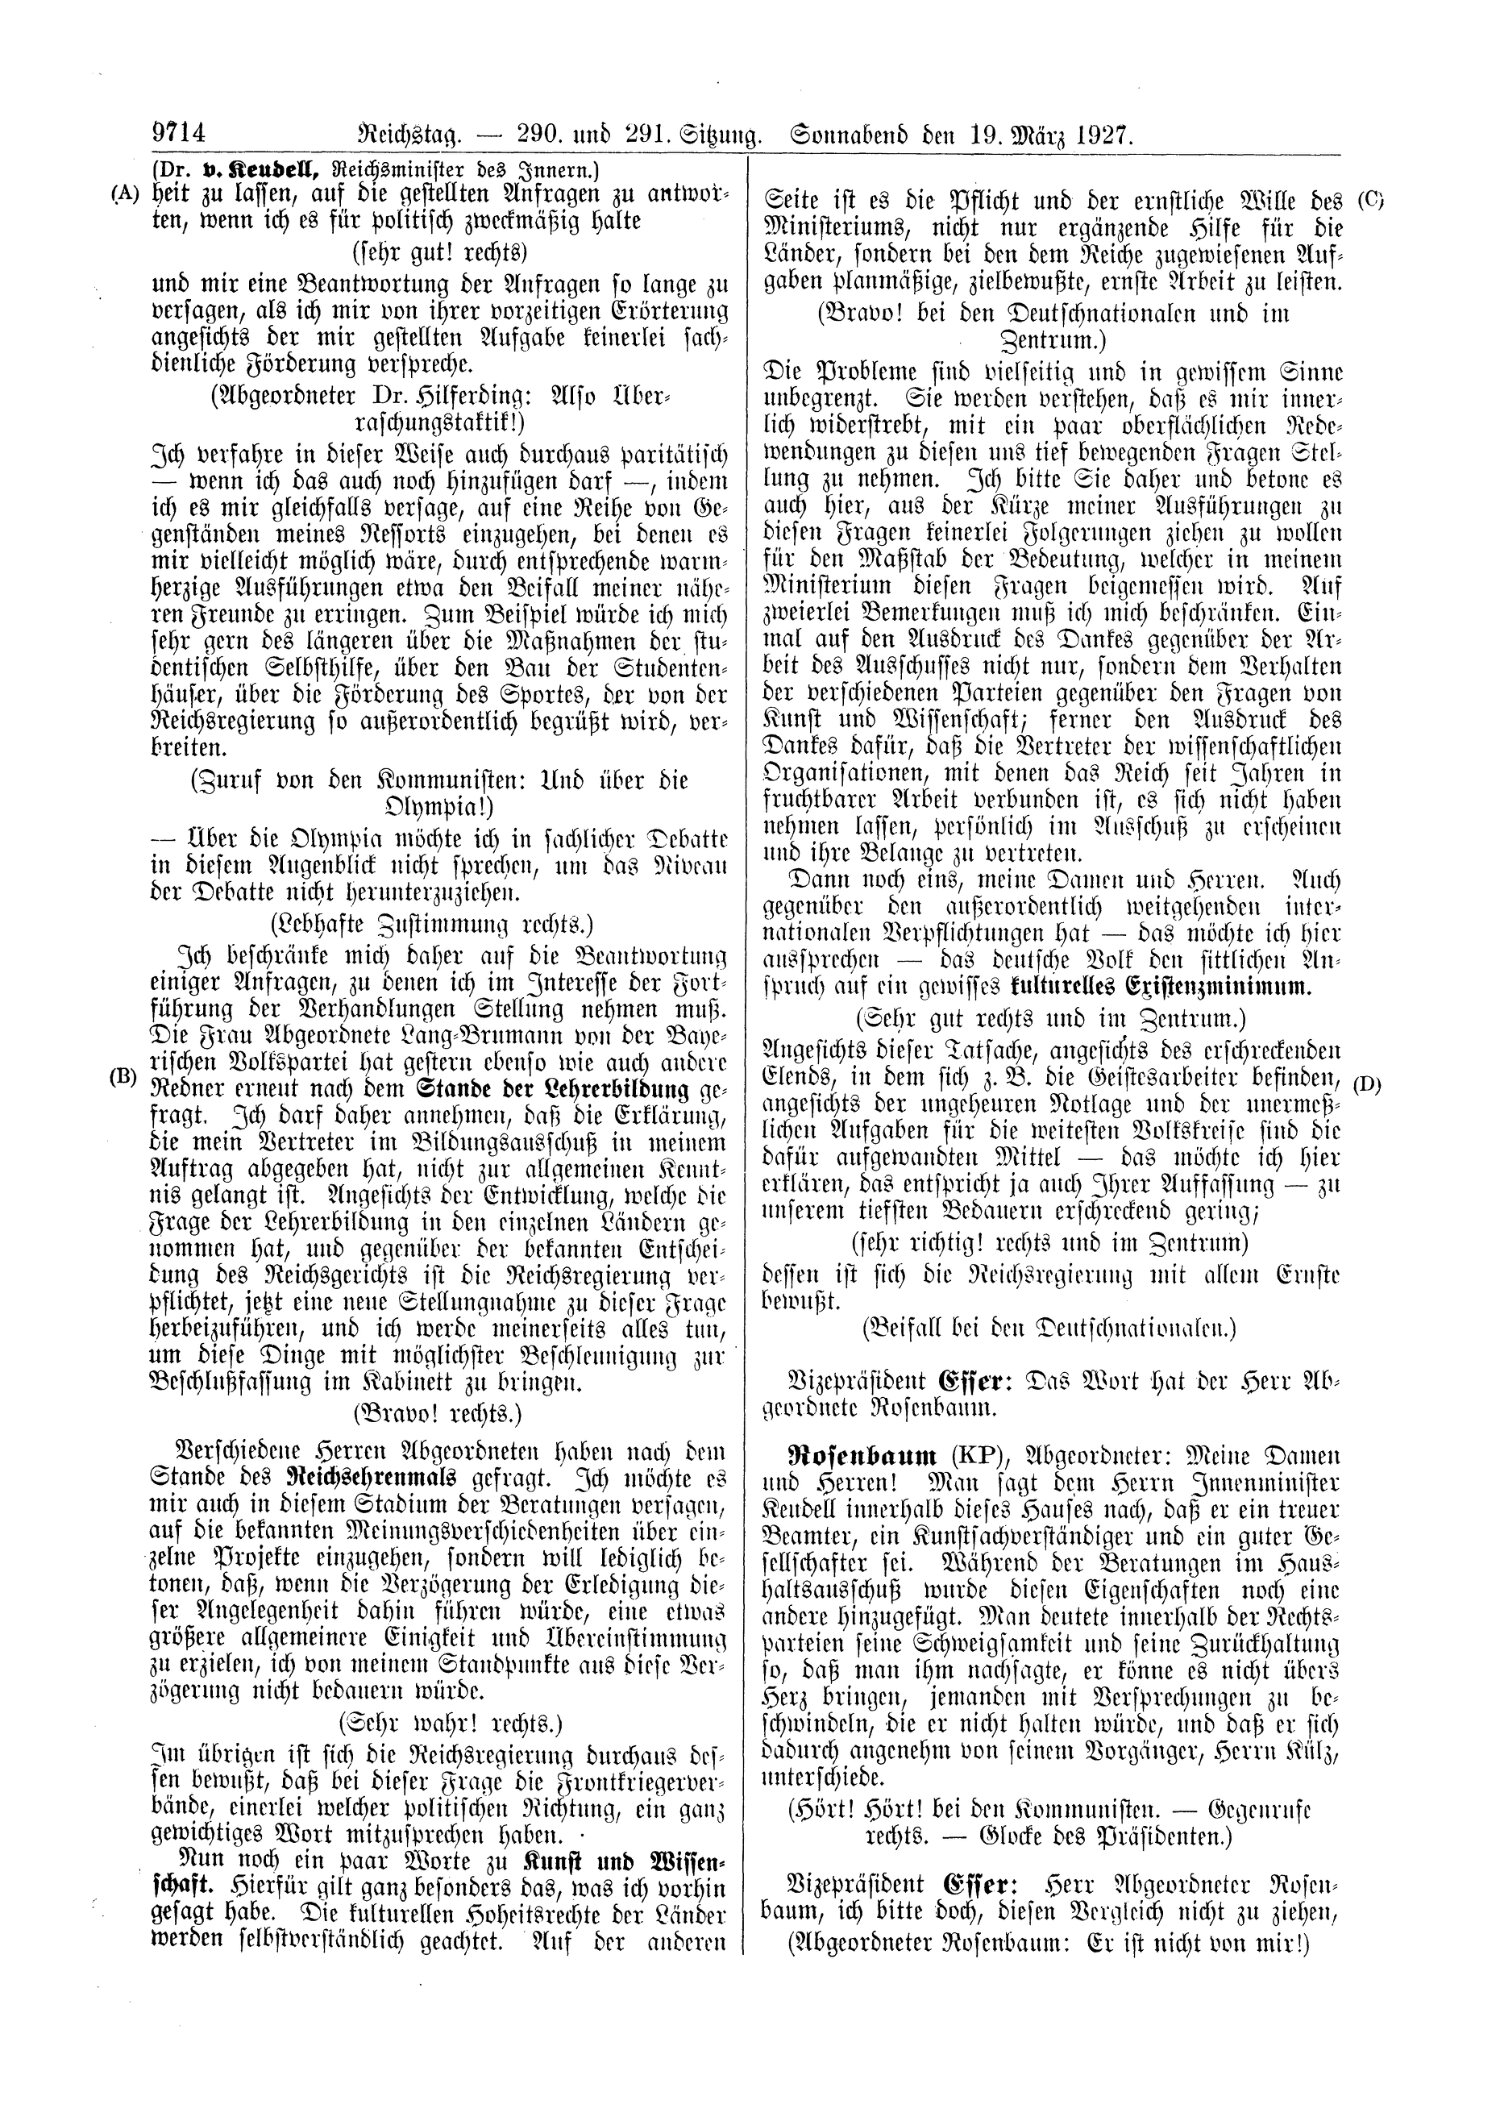 Scan of page 9714